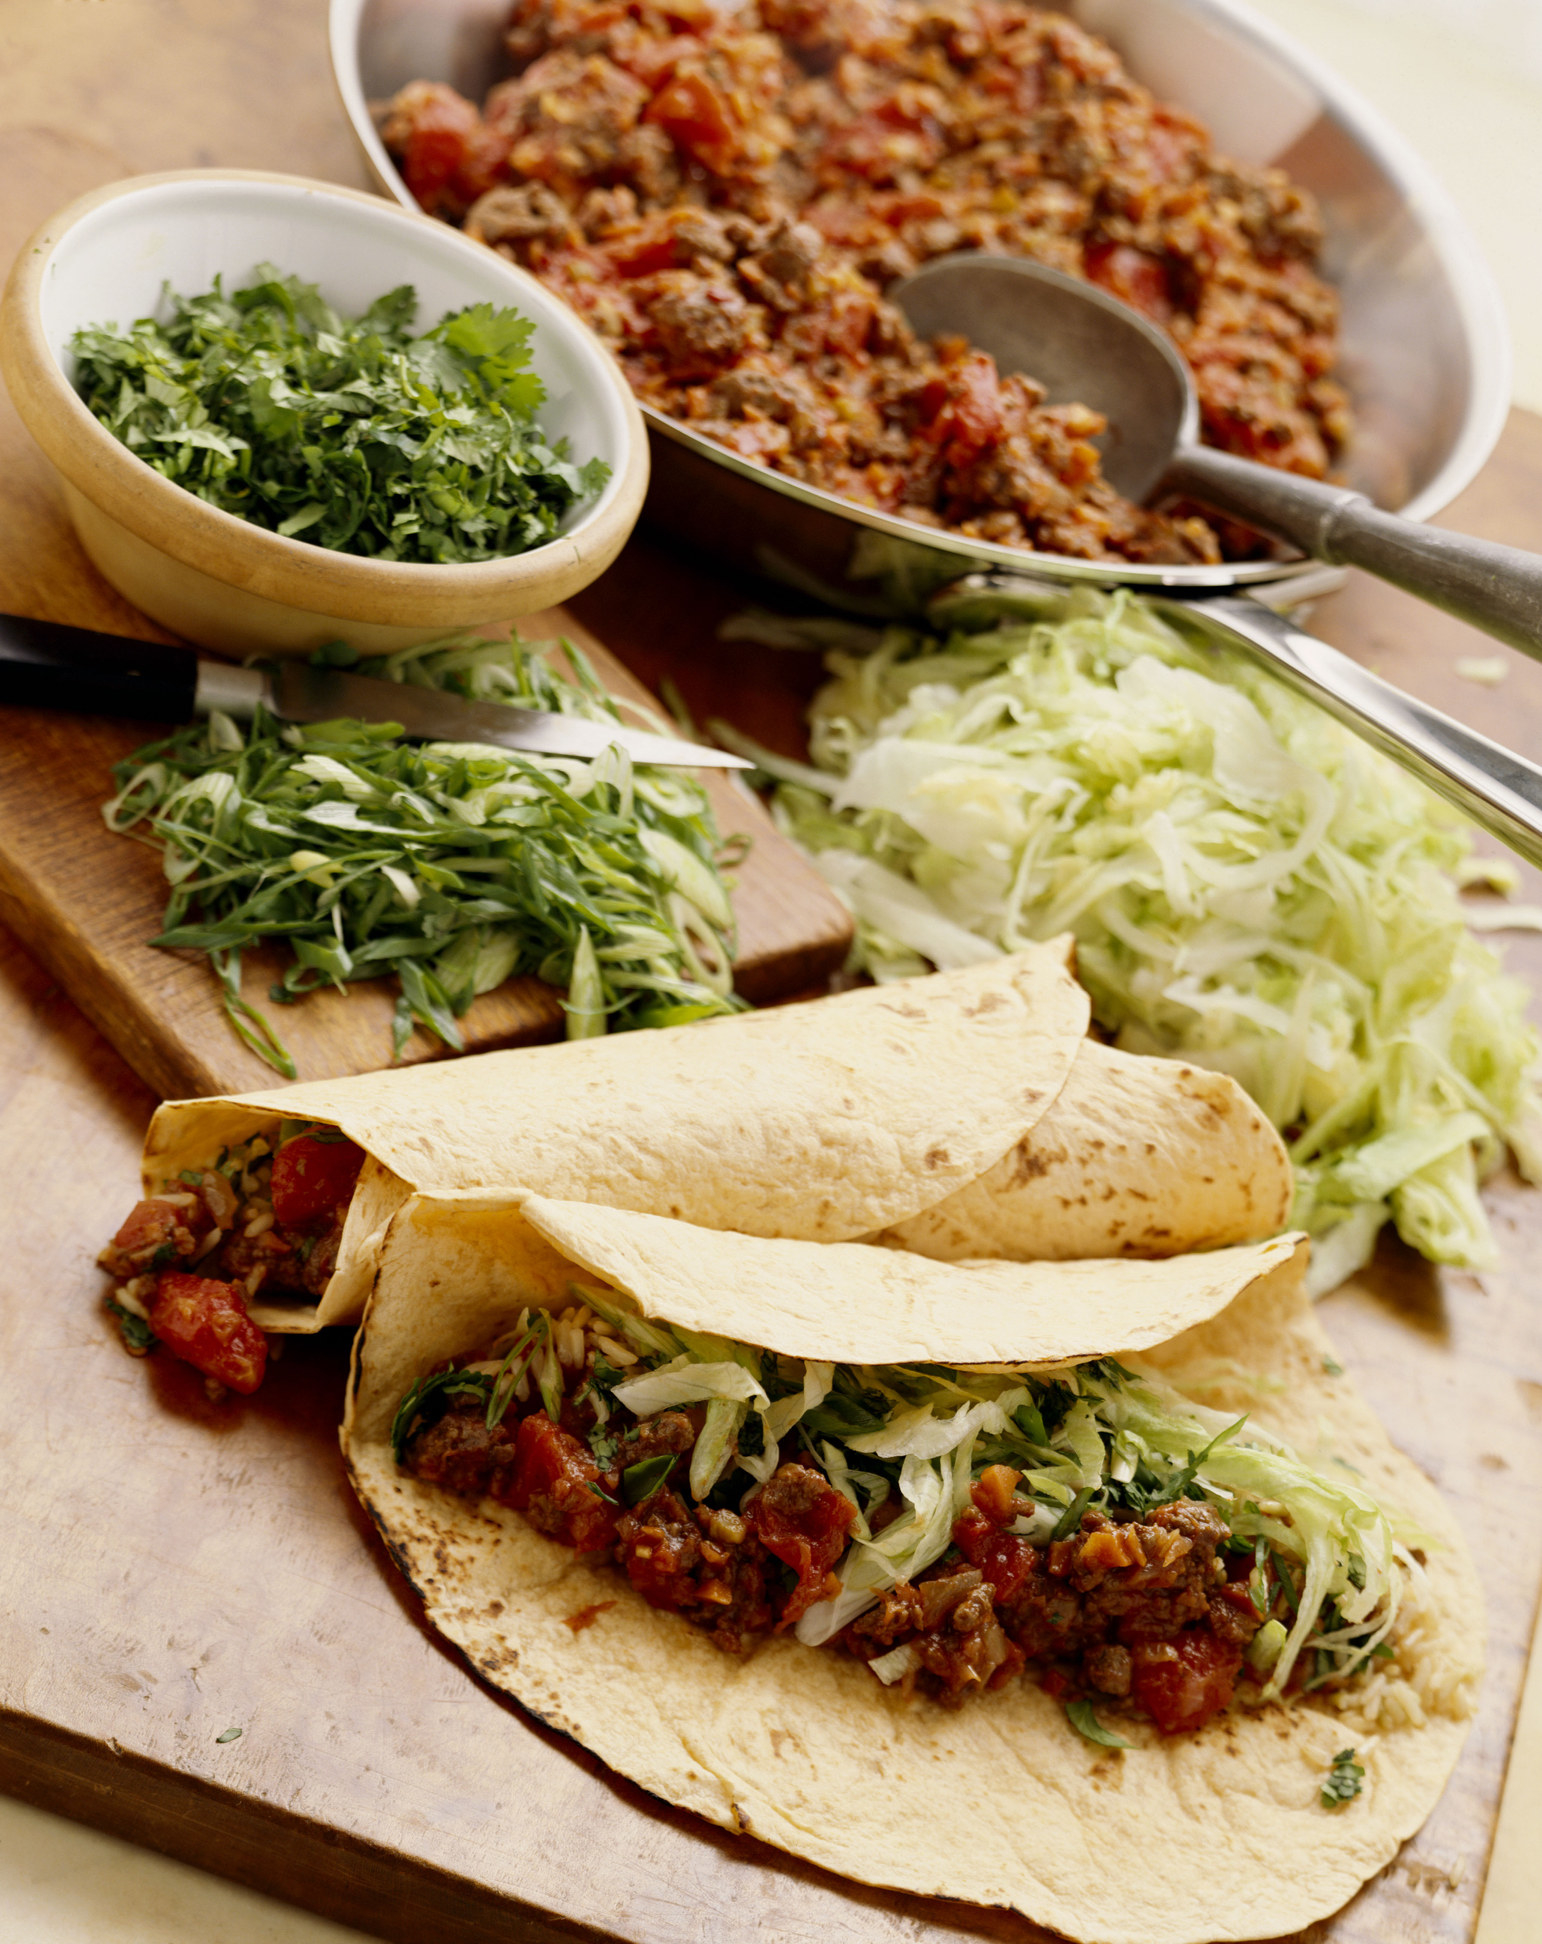 Soft tacos with ground beef